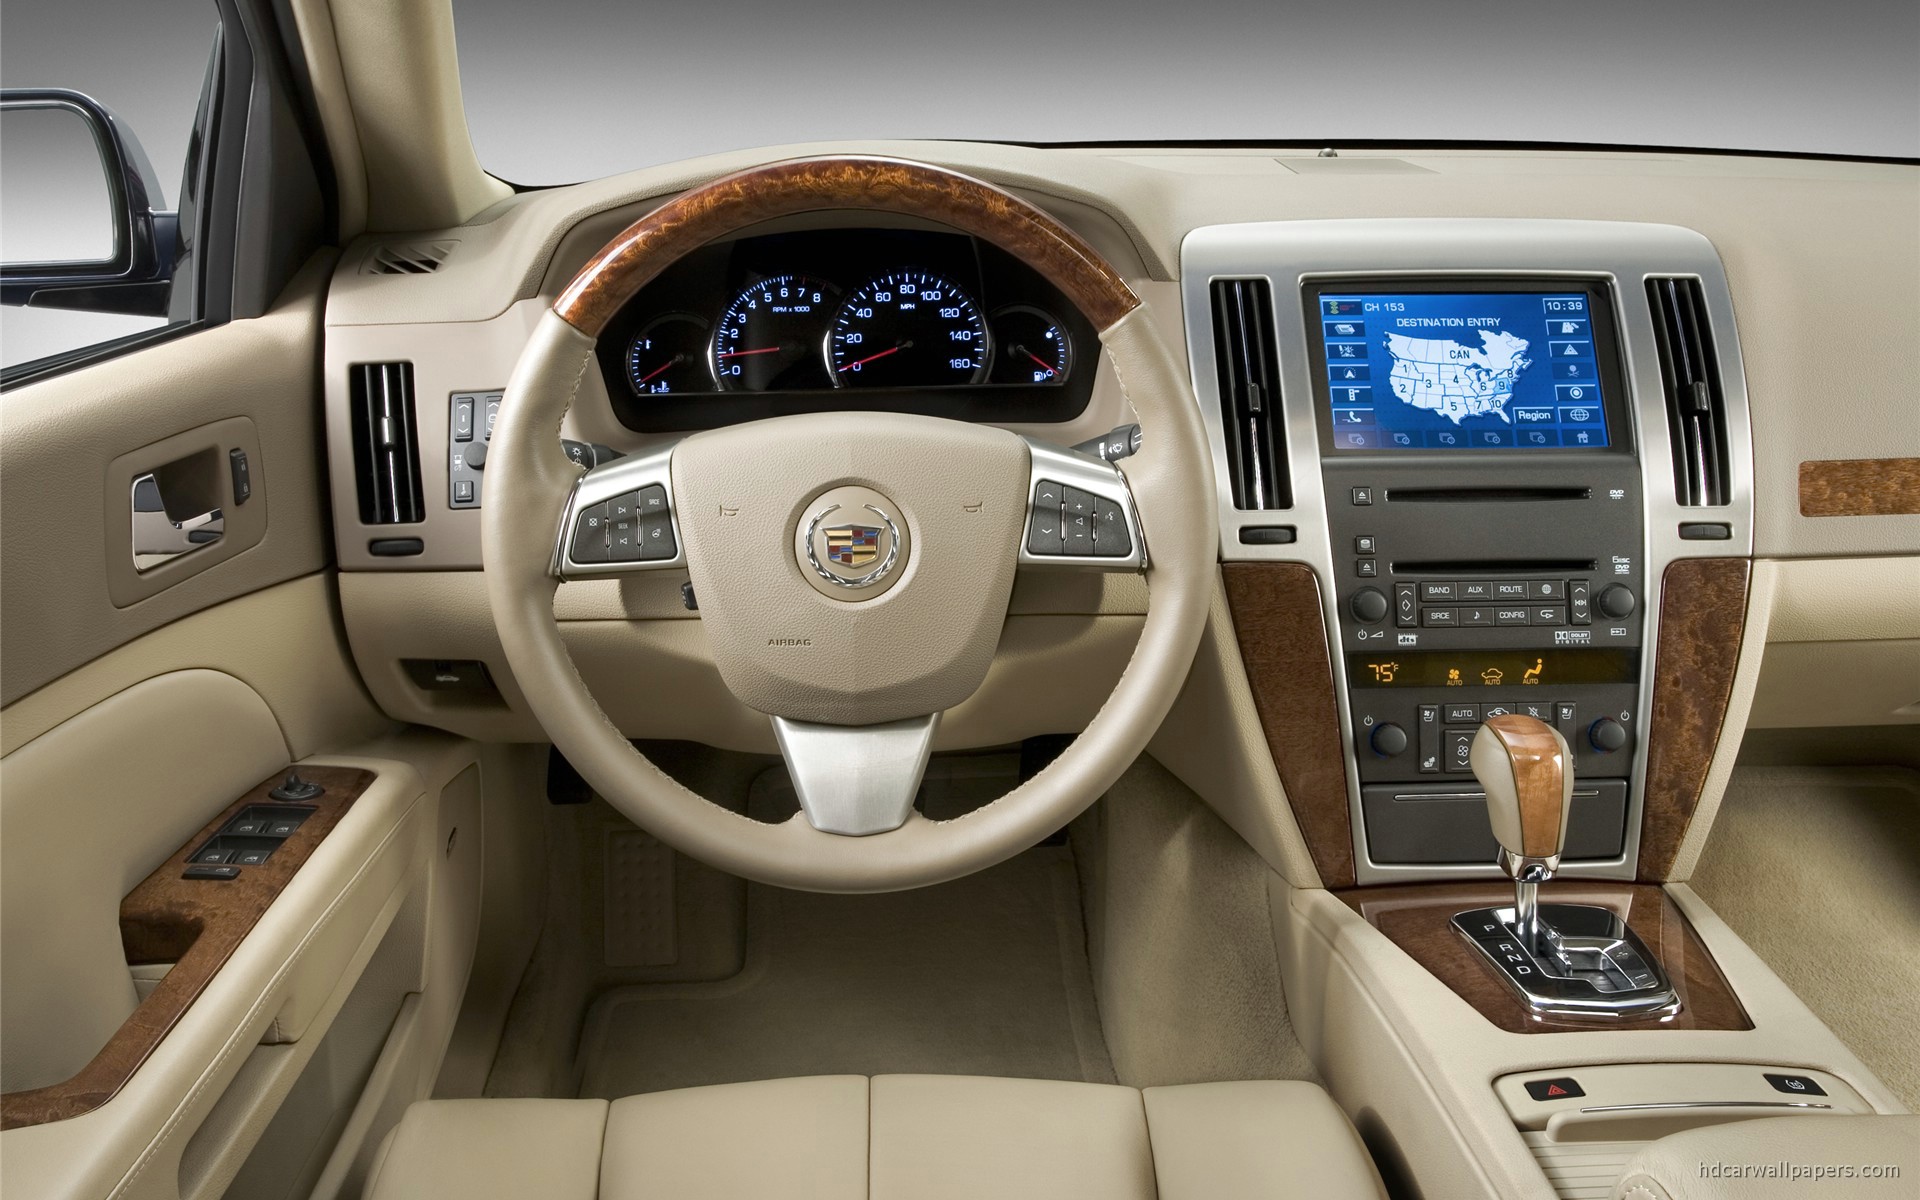 http://www.hdcarwallpapers.com/walls/cadillac_sts_car_interior-wide.jpg